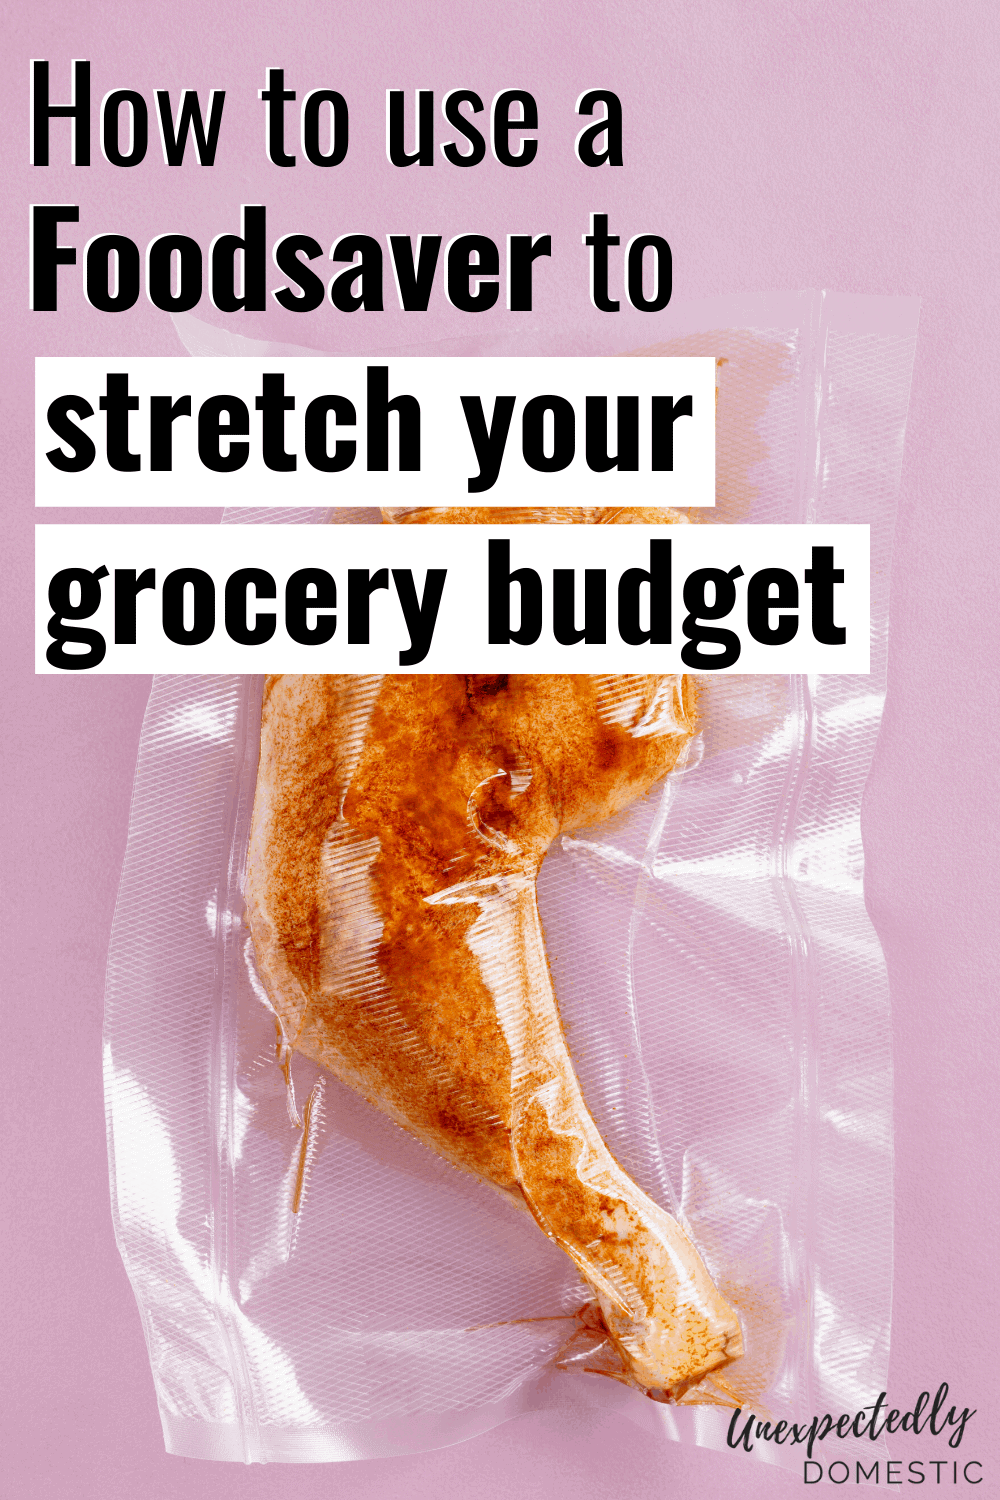 Foodsaver tips and tricks! How to use a Foodsaver vacuum sealer to stretch your grocery budget, and keep everything fresher longer!